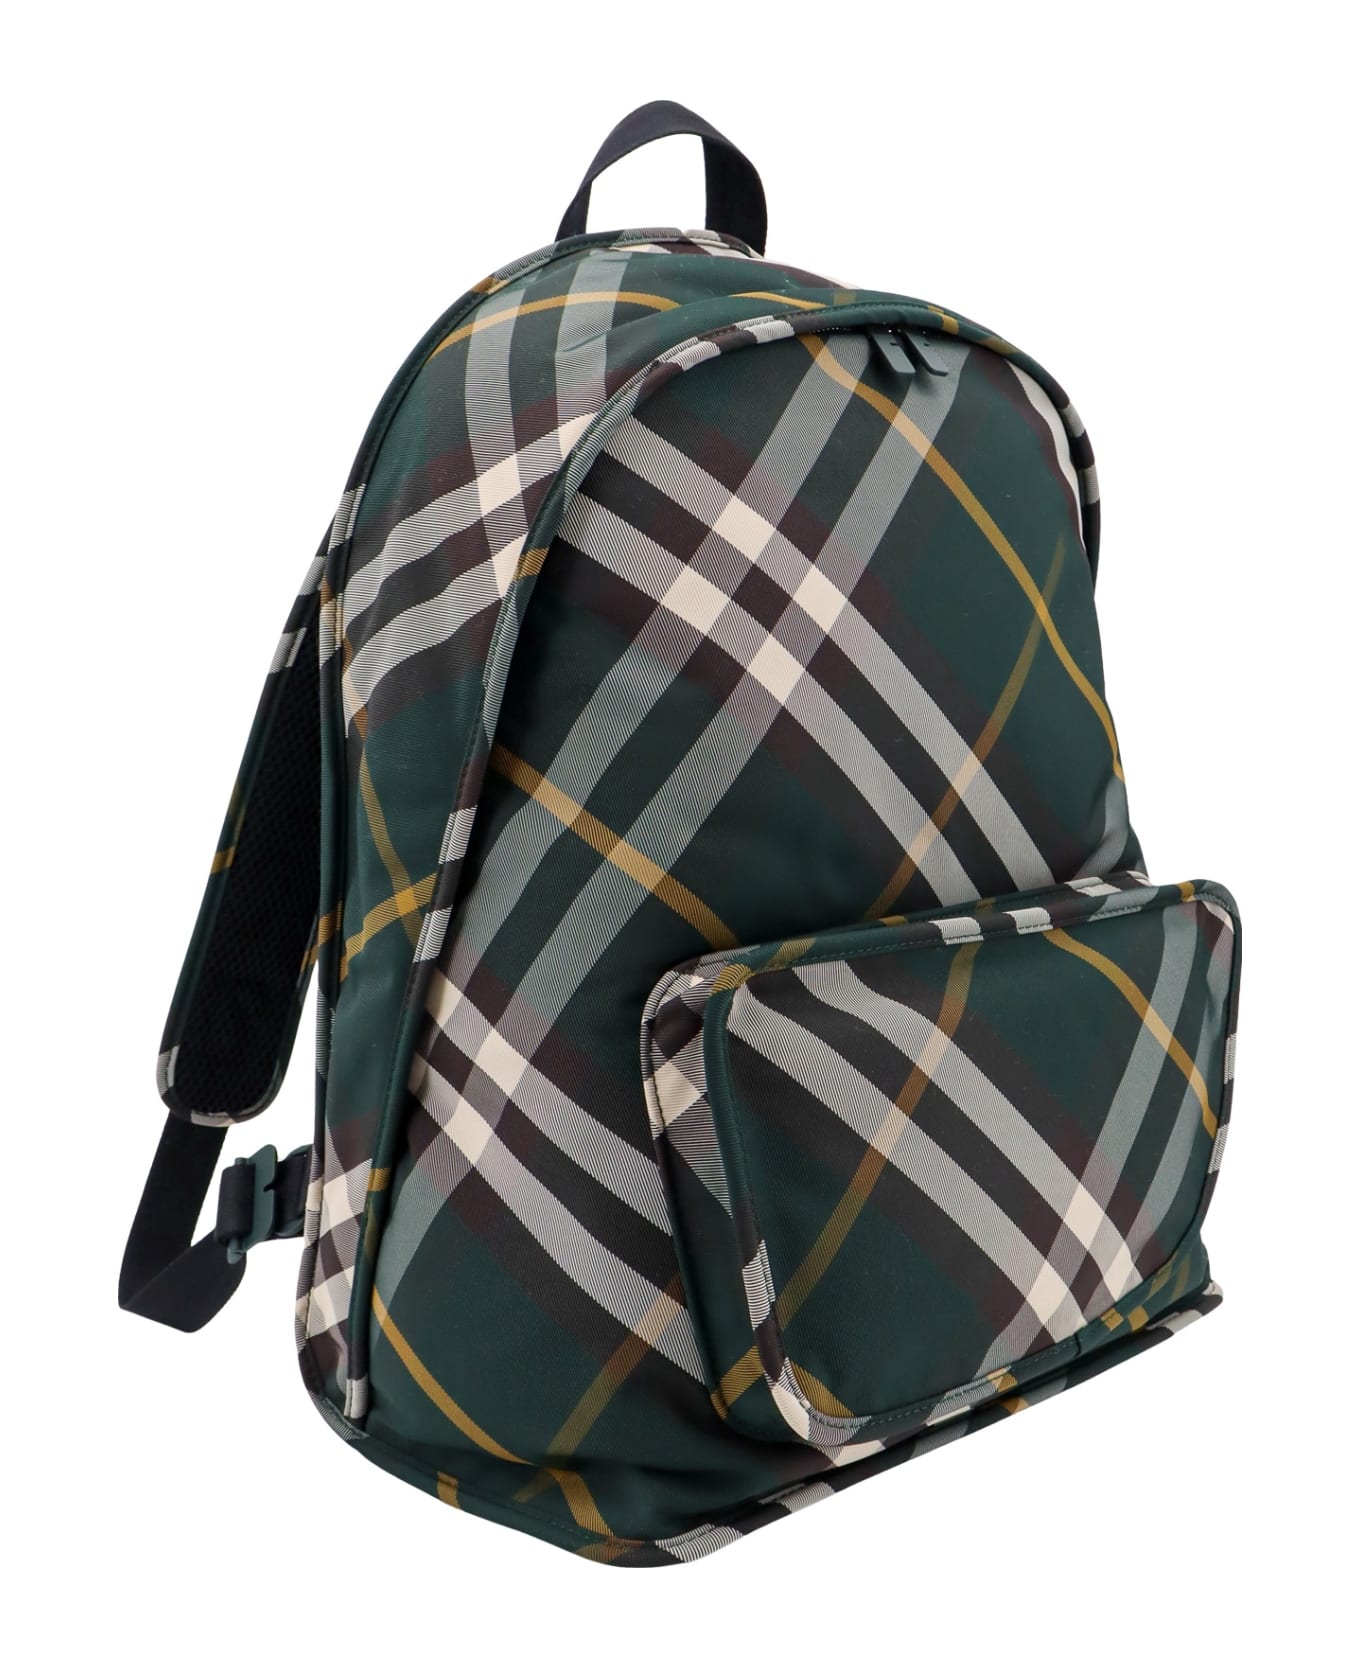 Burberry Backpack - Ivy バックパック